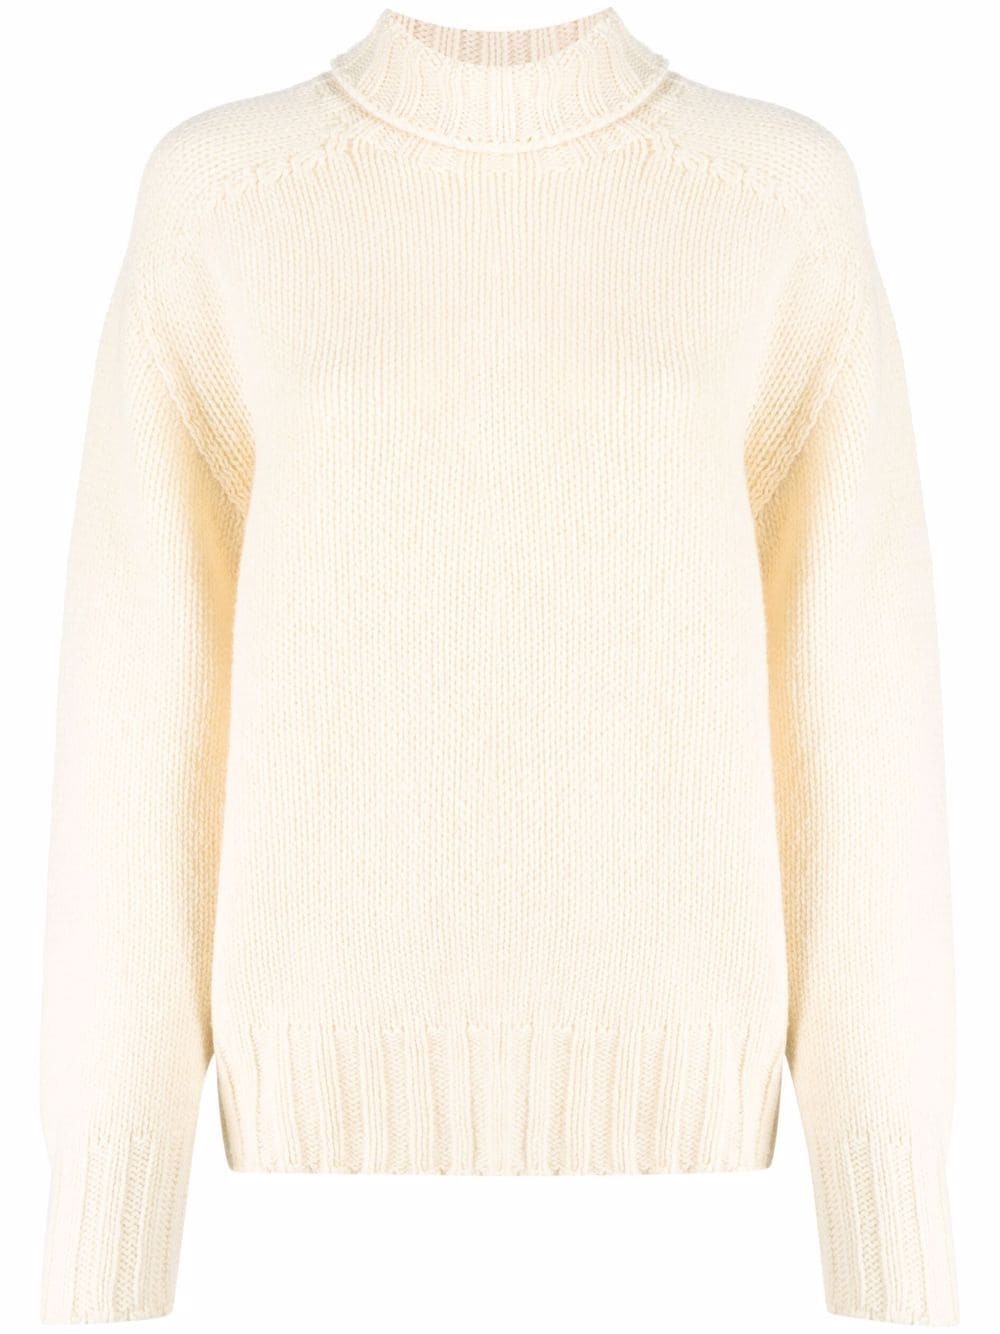 Grobstrick Pullover in Creme